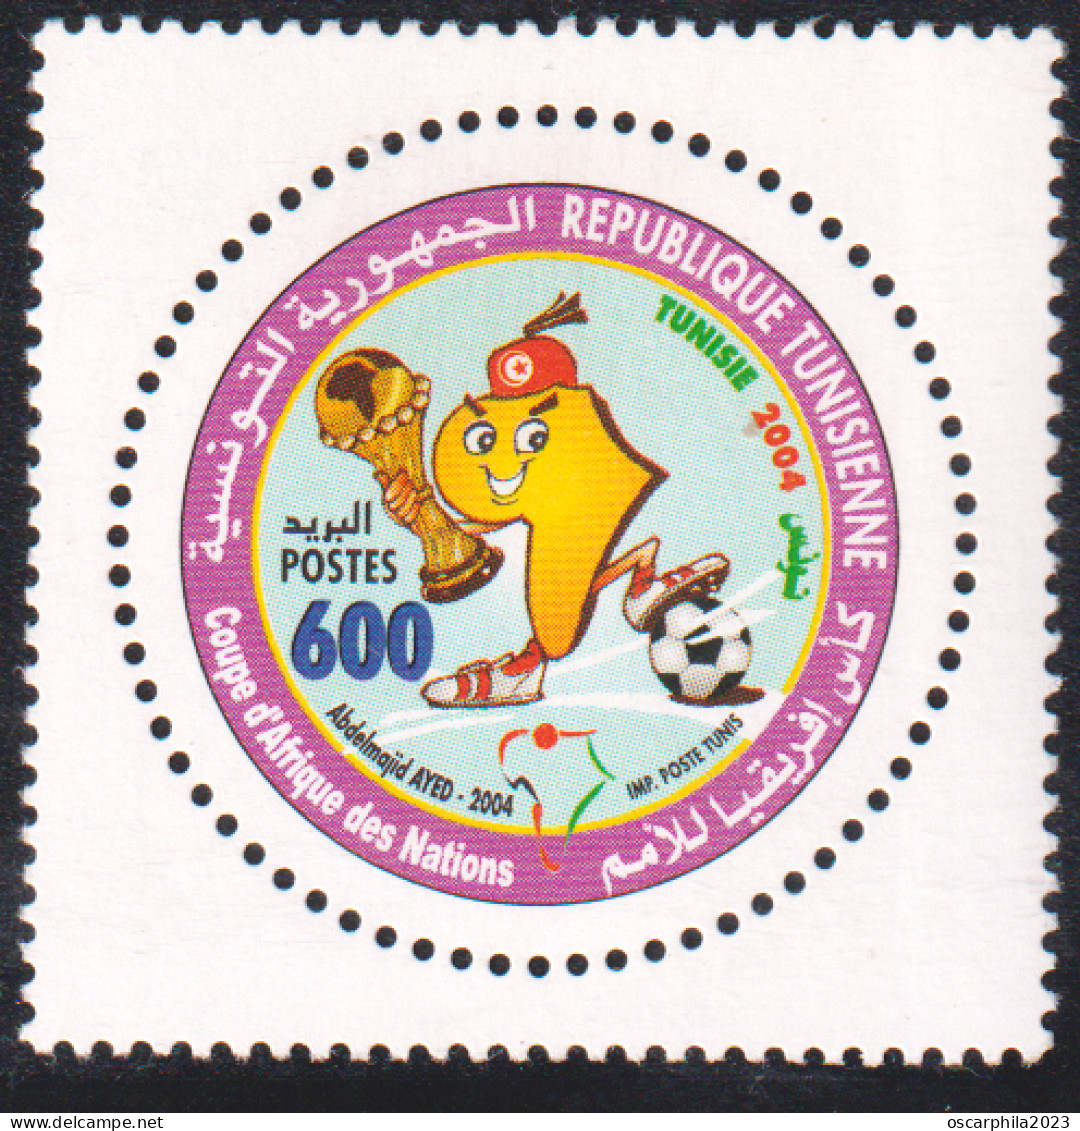 2004 -Tunisie/ Y&T -1507 -Coupe D'Afrique Des Nations De Football 2004 -  / MNH***** - Africa Cup Of Nations